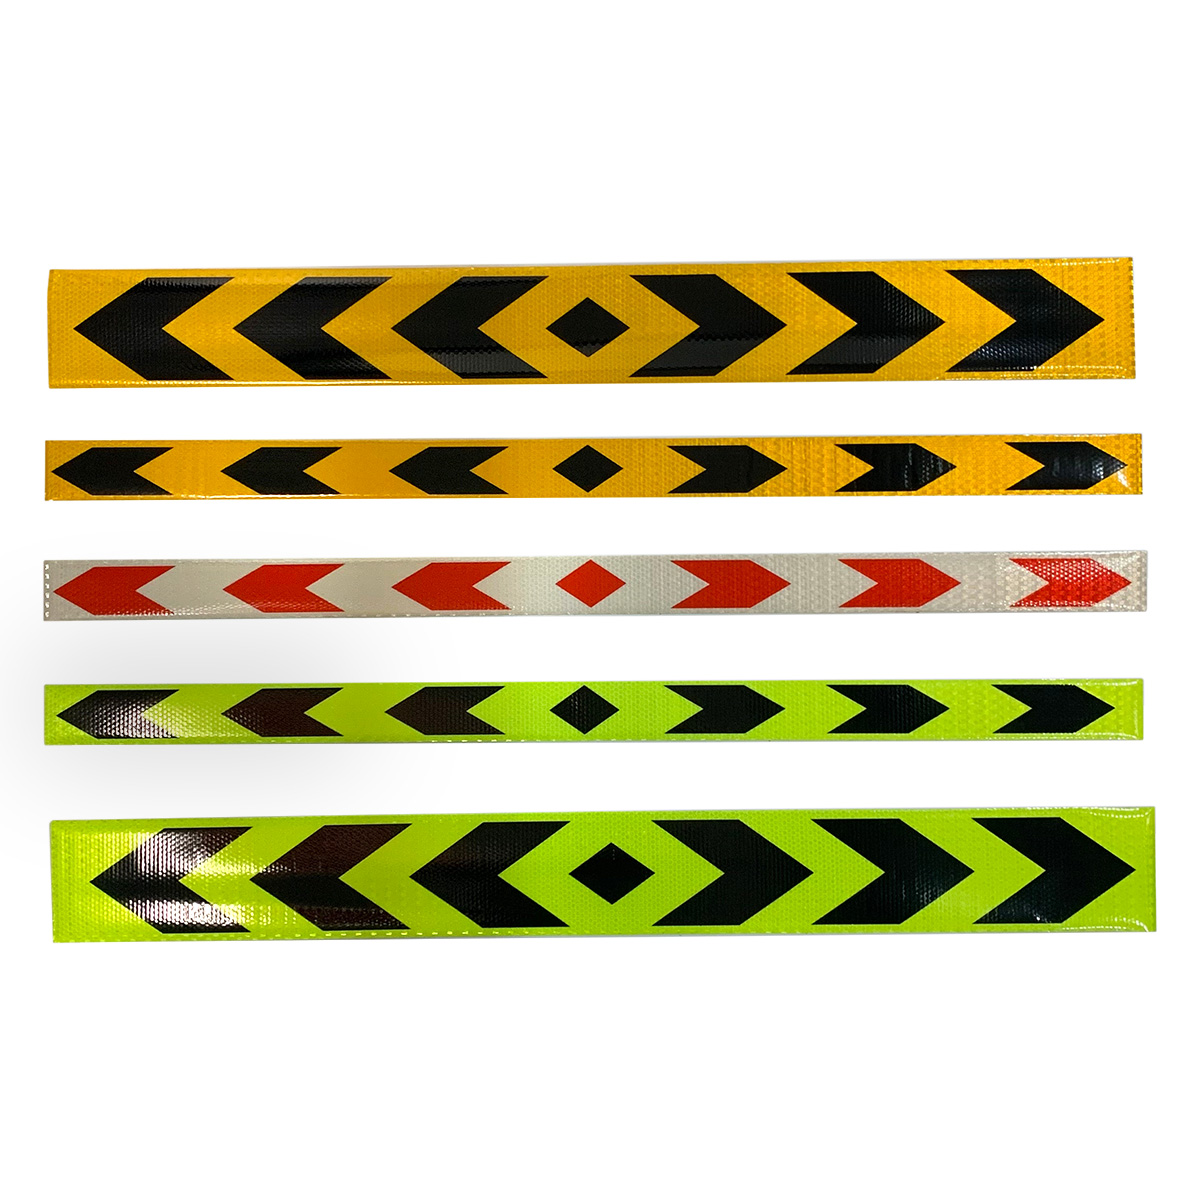 10cmx90cm PVC Reflective Arrow Stickers for Truck Safety Marking